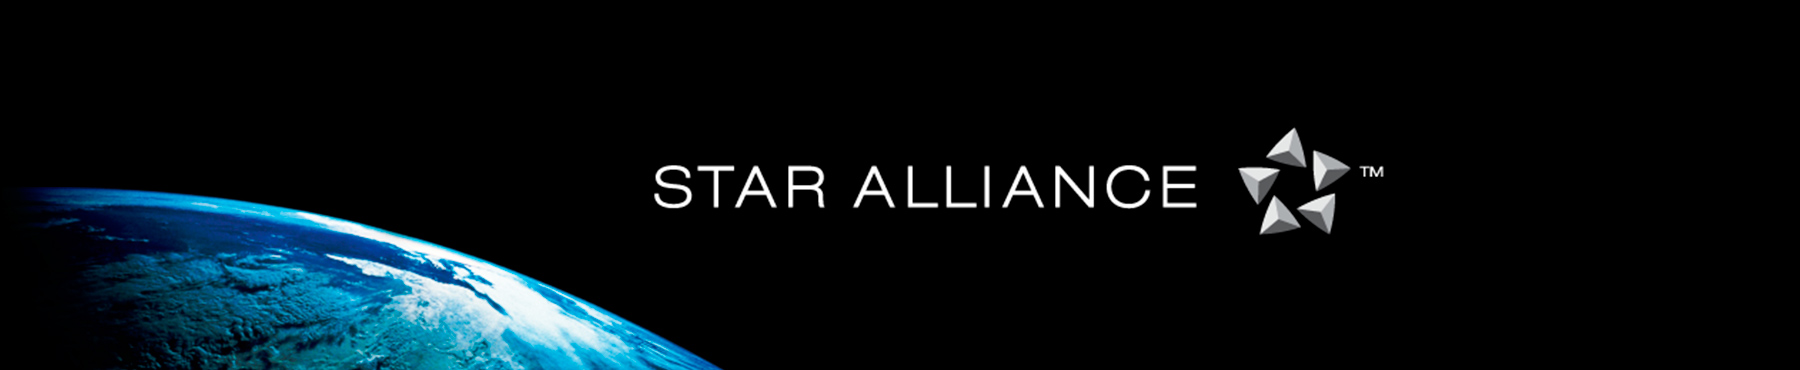 Round the World mit Star Alliance Book and Fly